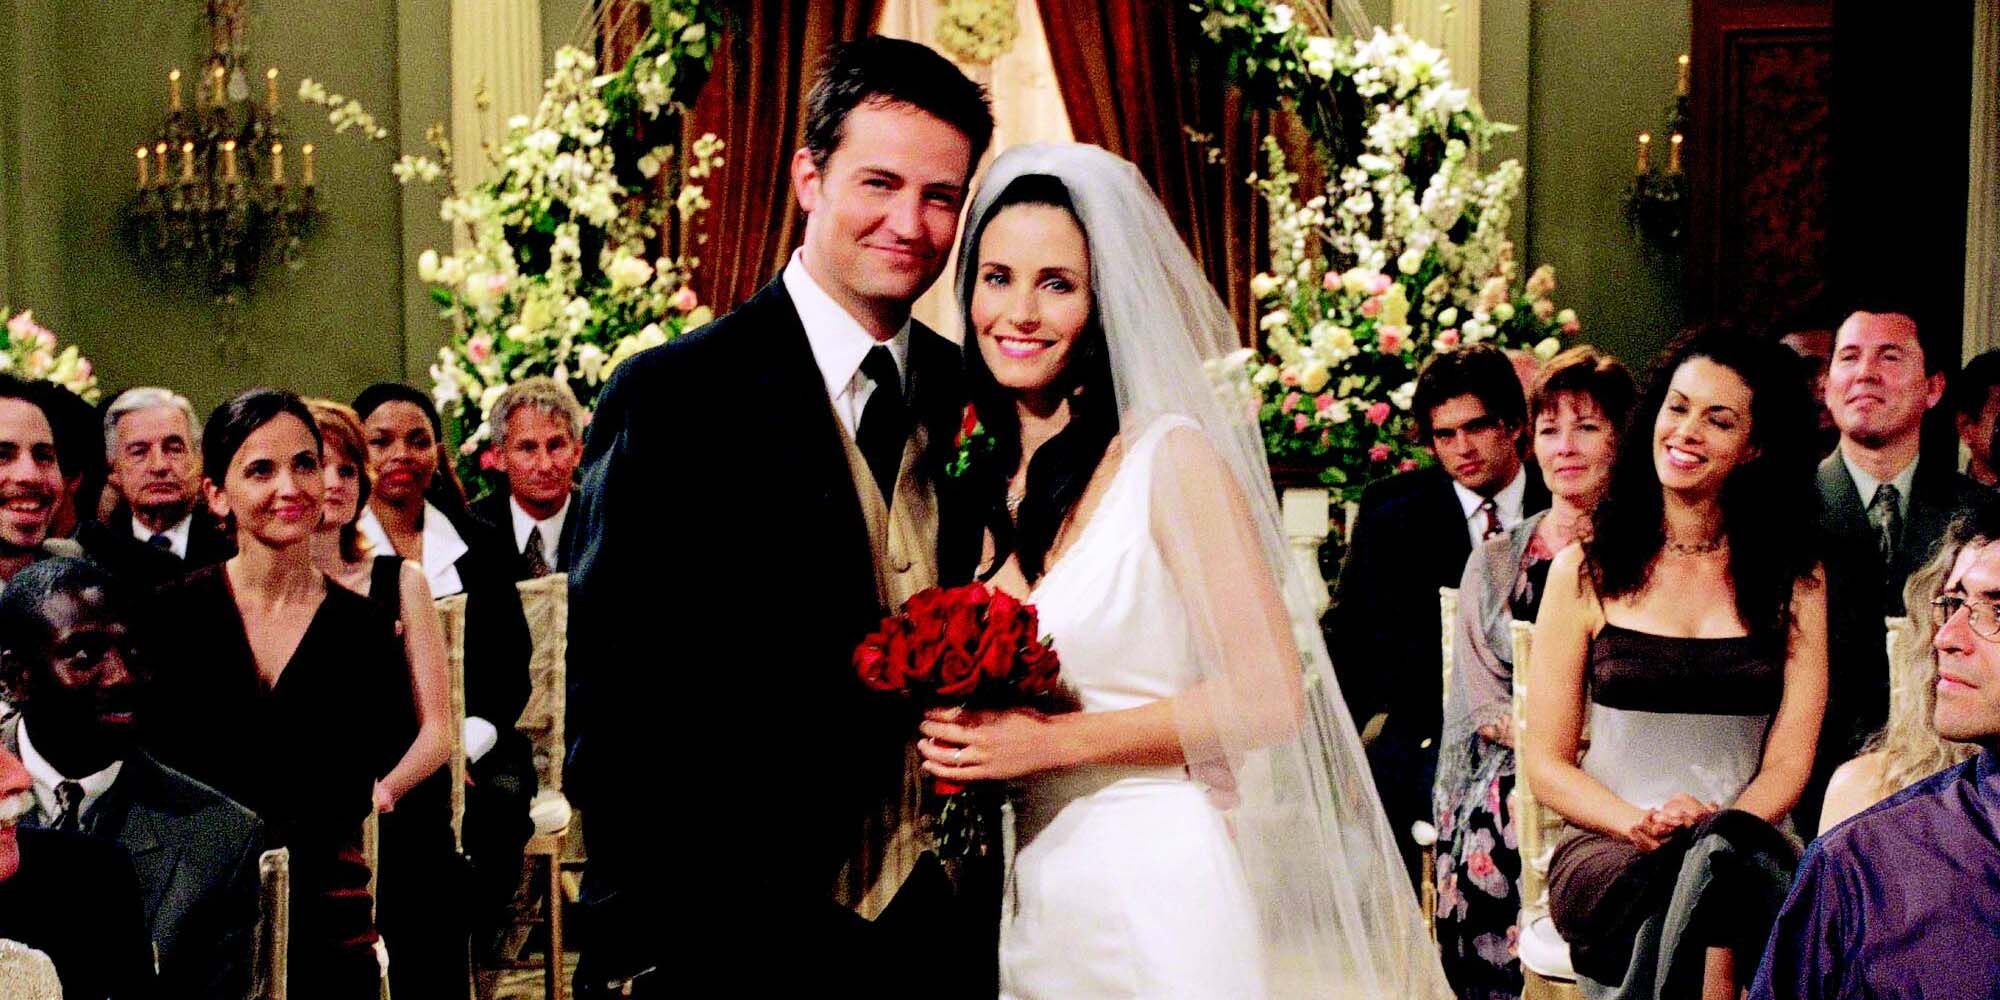 Chandler and Monica pose for a photo after their wedding in Friends